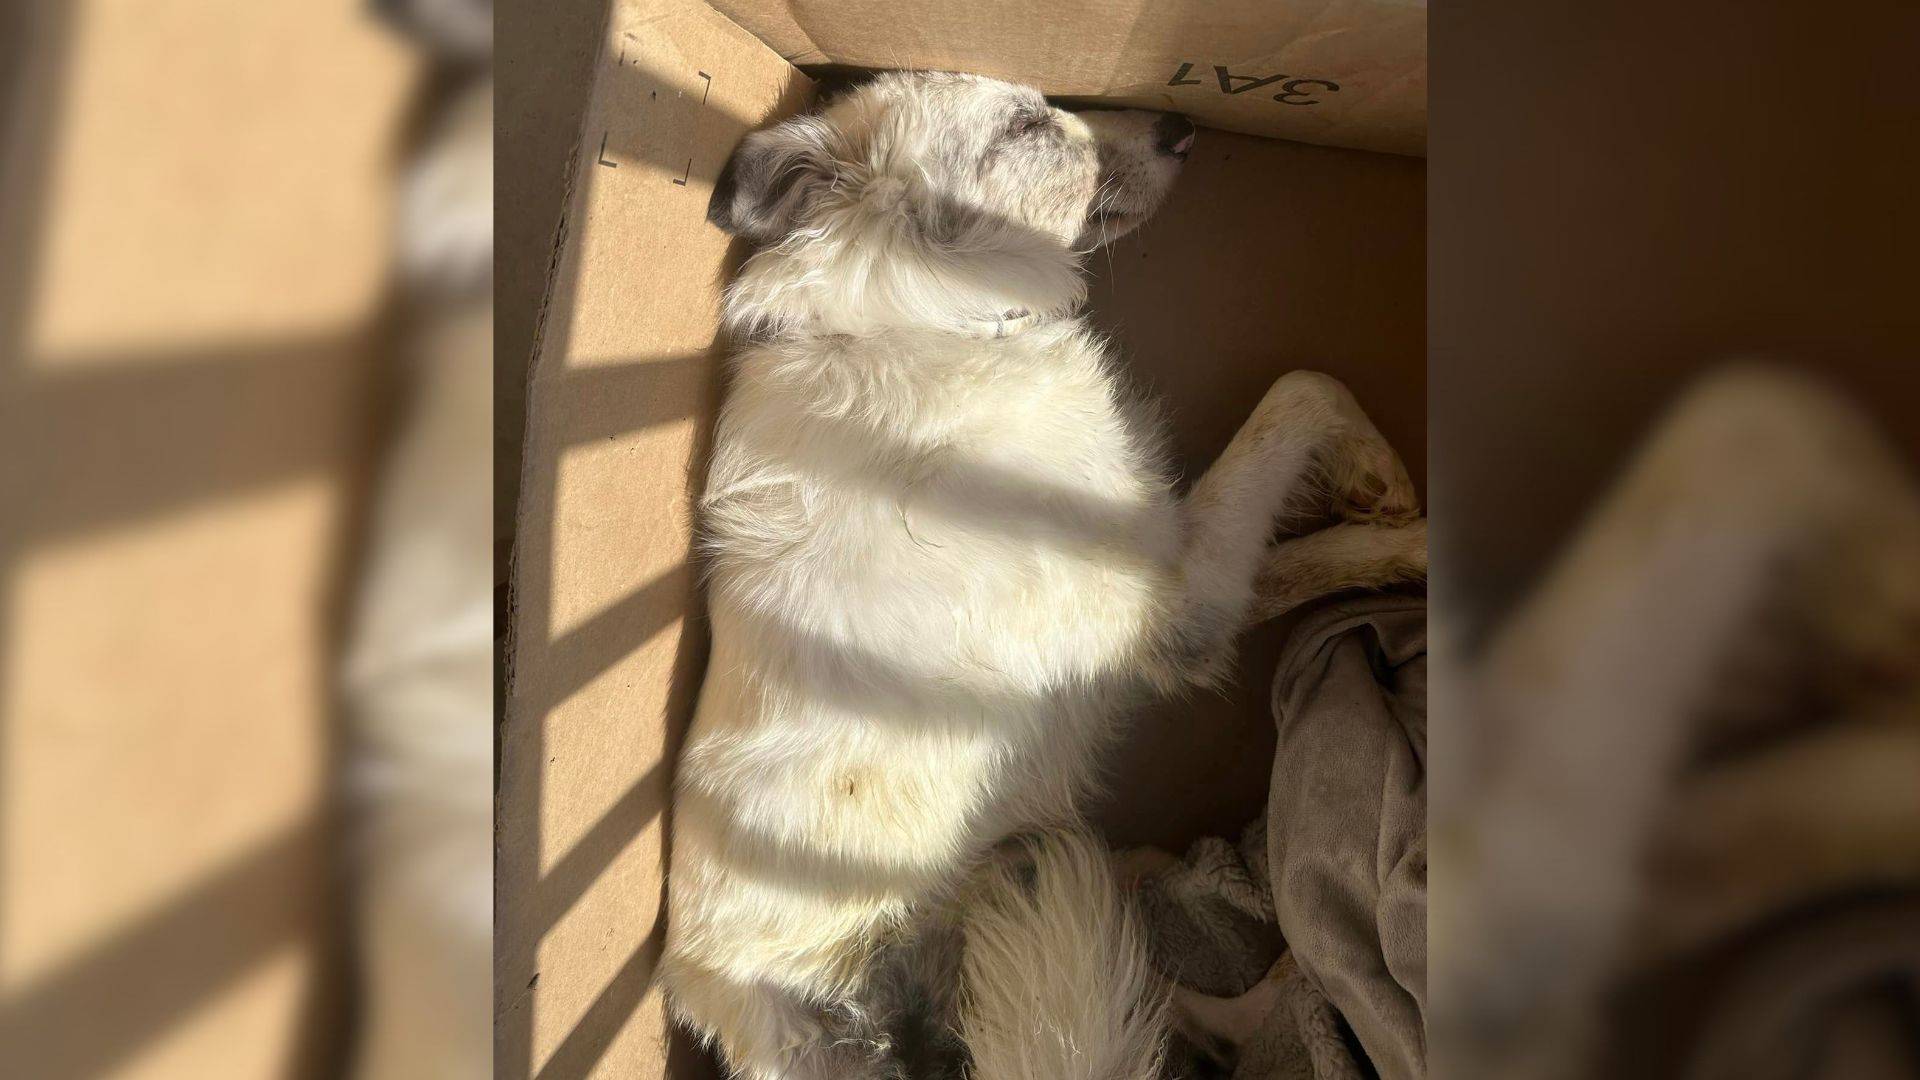 Woman Received A Package With A Lifeless Dog Inside So She Rushed To Help Him